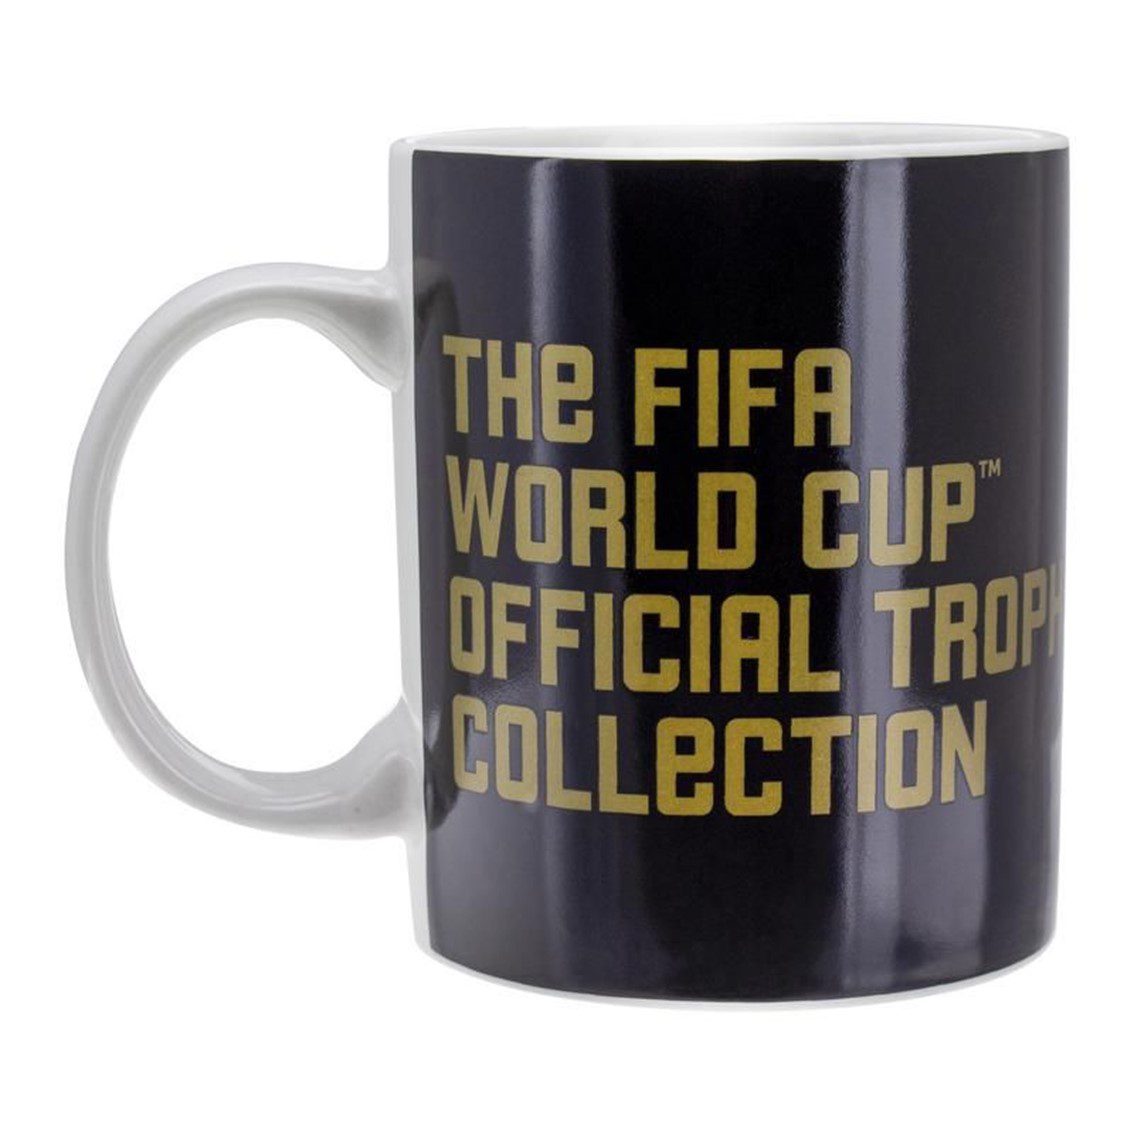 5055964795139-PN-PP10281FI-Cod.-Articulo-MGS0000012126-Set-taza-y-calcetines-paladone-fifa-3